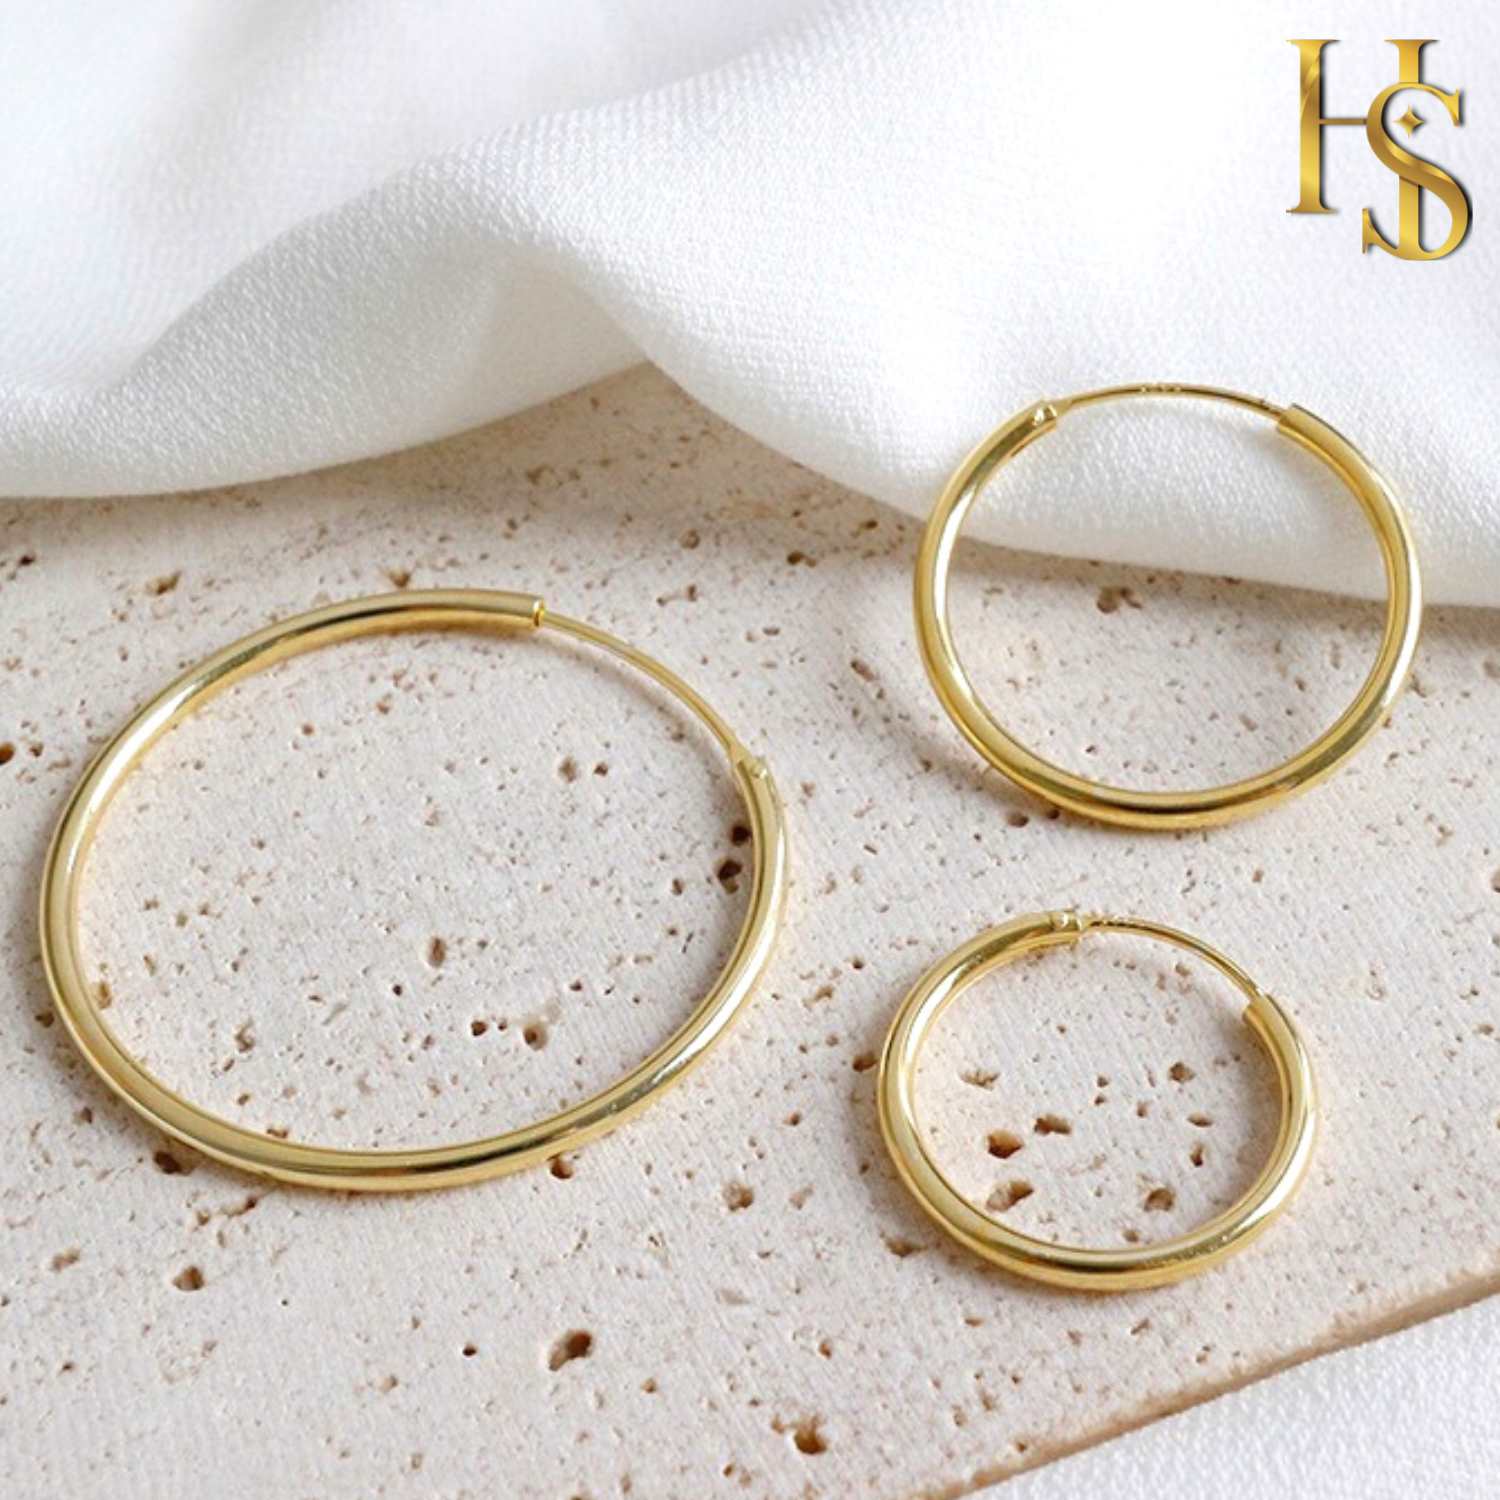 Classic Gold Hoop Earrings in 925 Silver  12mm Thickness  Small Si   HighSpark